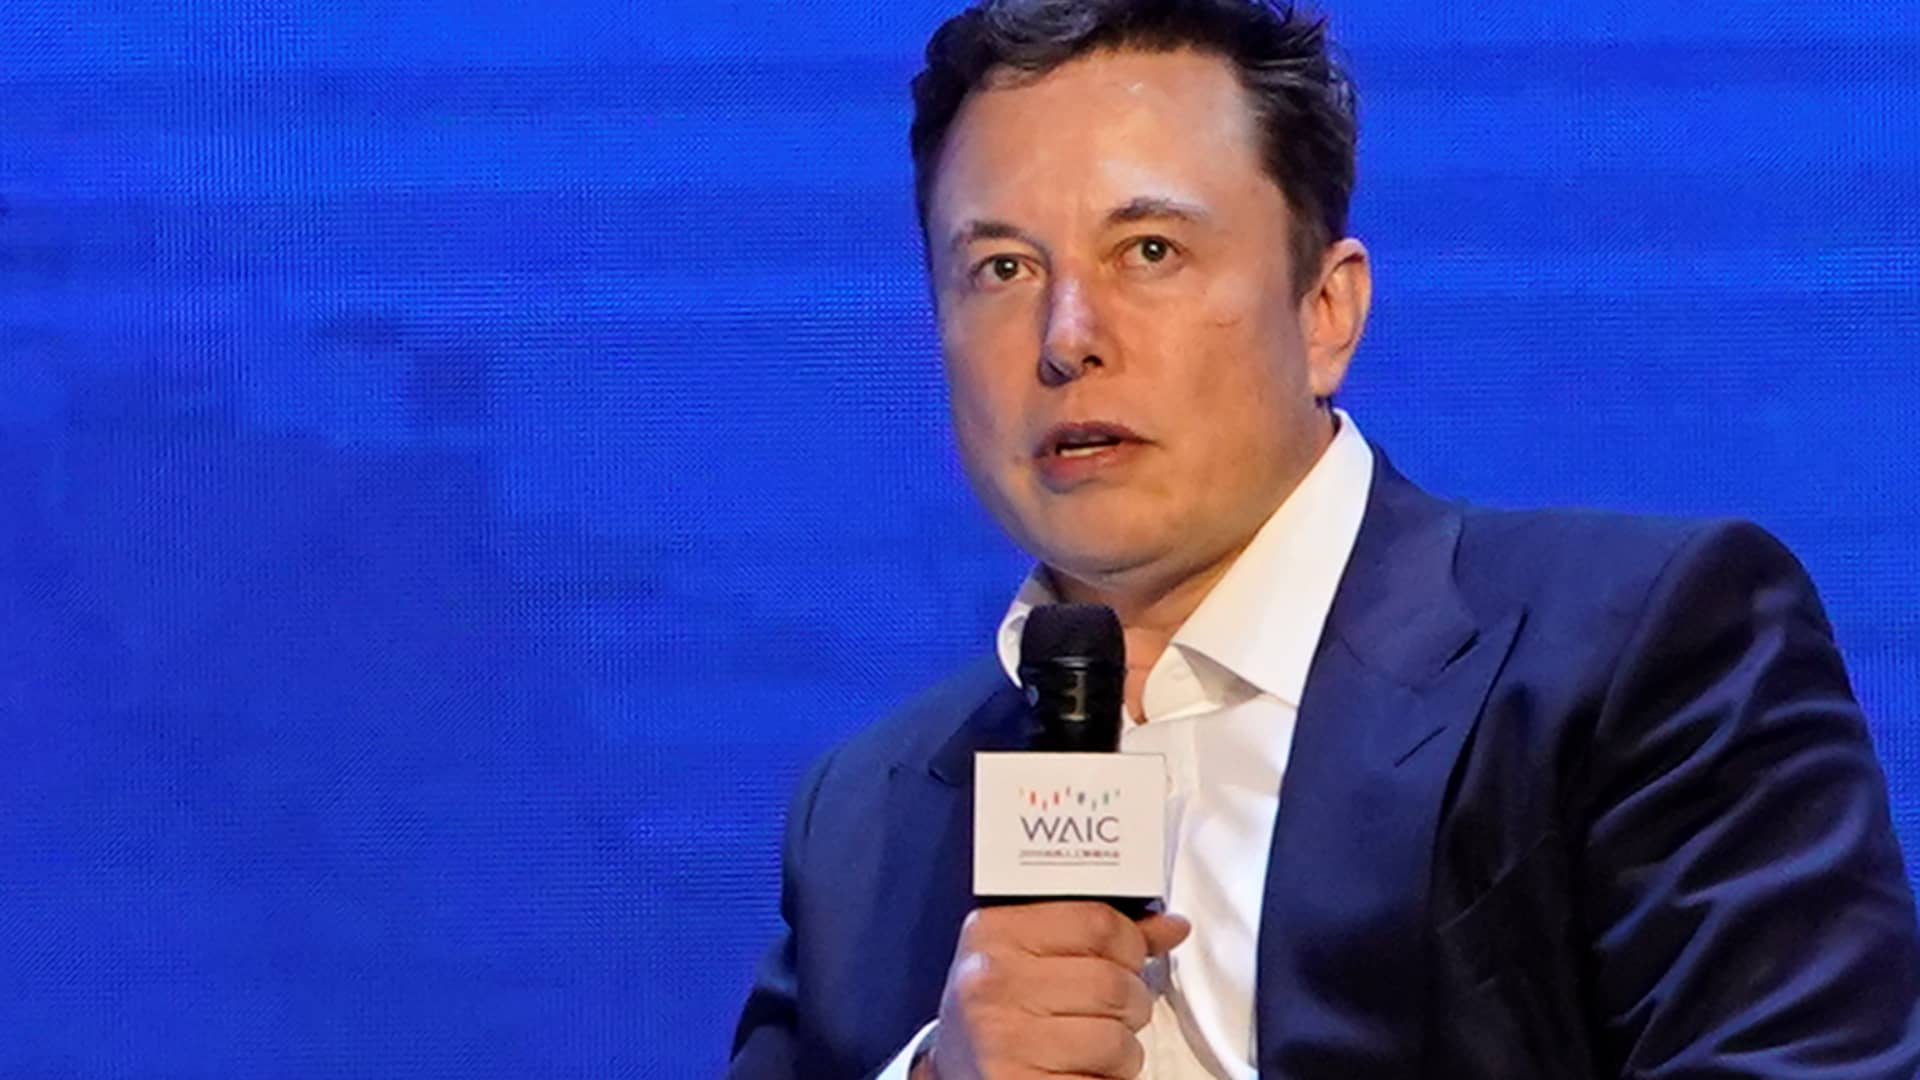 Tesla Inc CEO Elon Musk attends the World Artificial Intelligence Conference (WAIC) in Shanghai, China August 29, 2019.